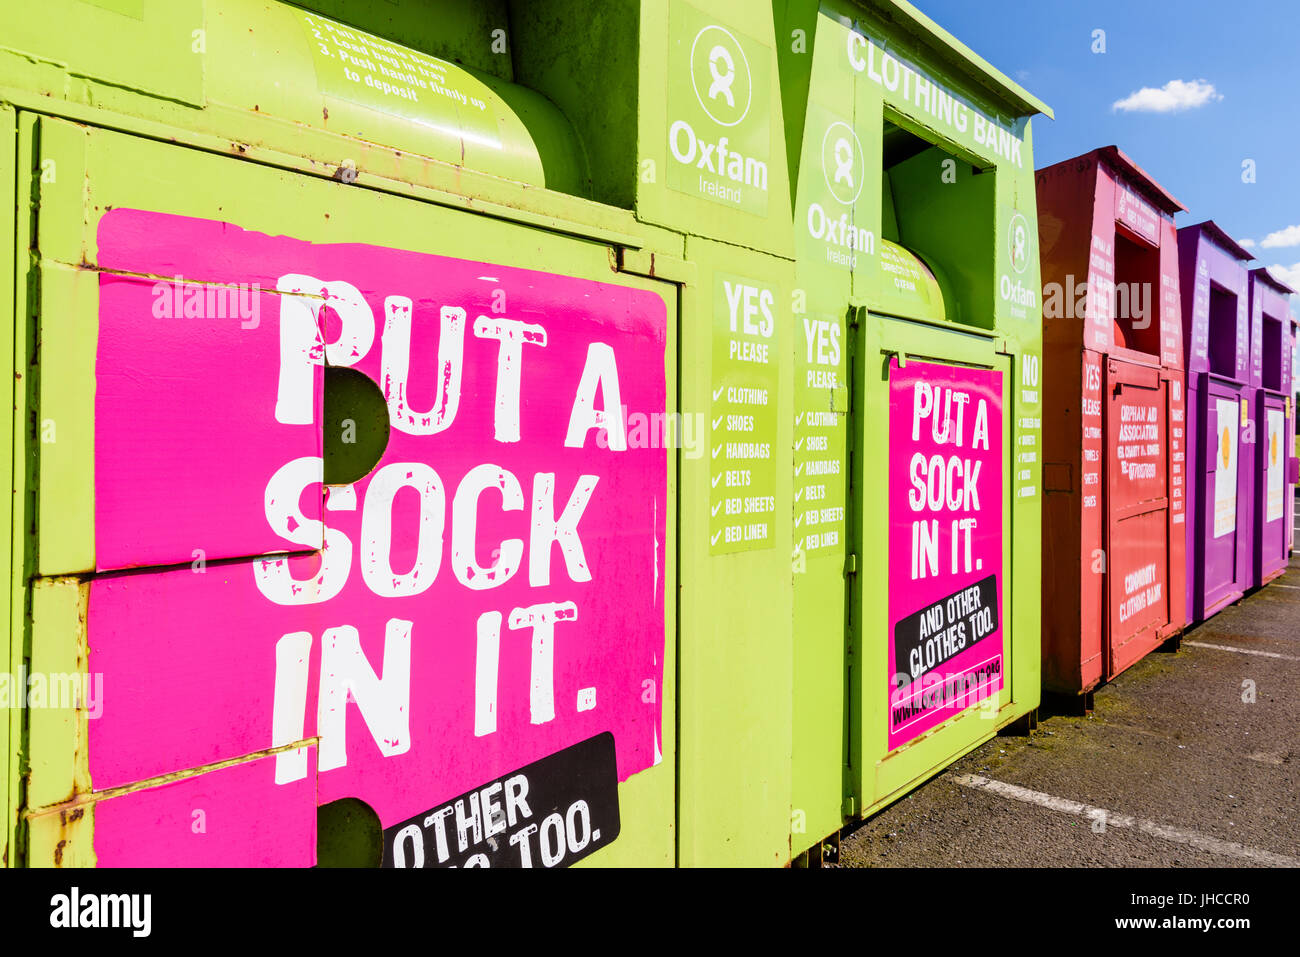 Clothes recycling bins at a car park. Stock Photo